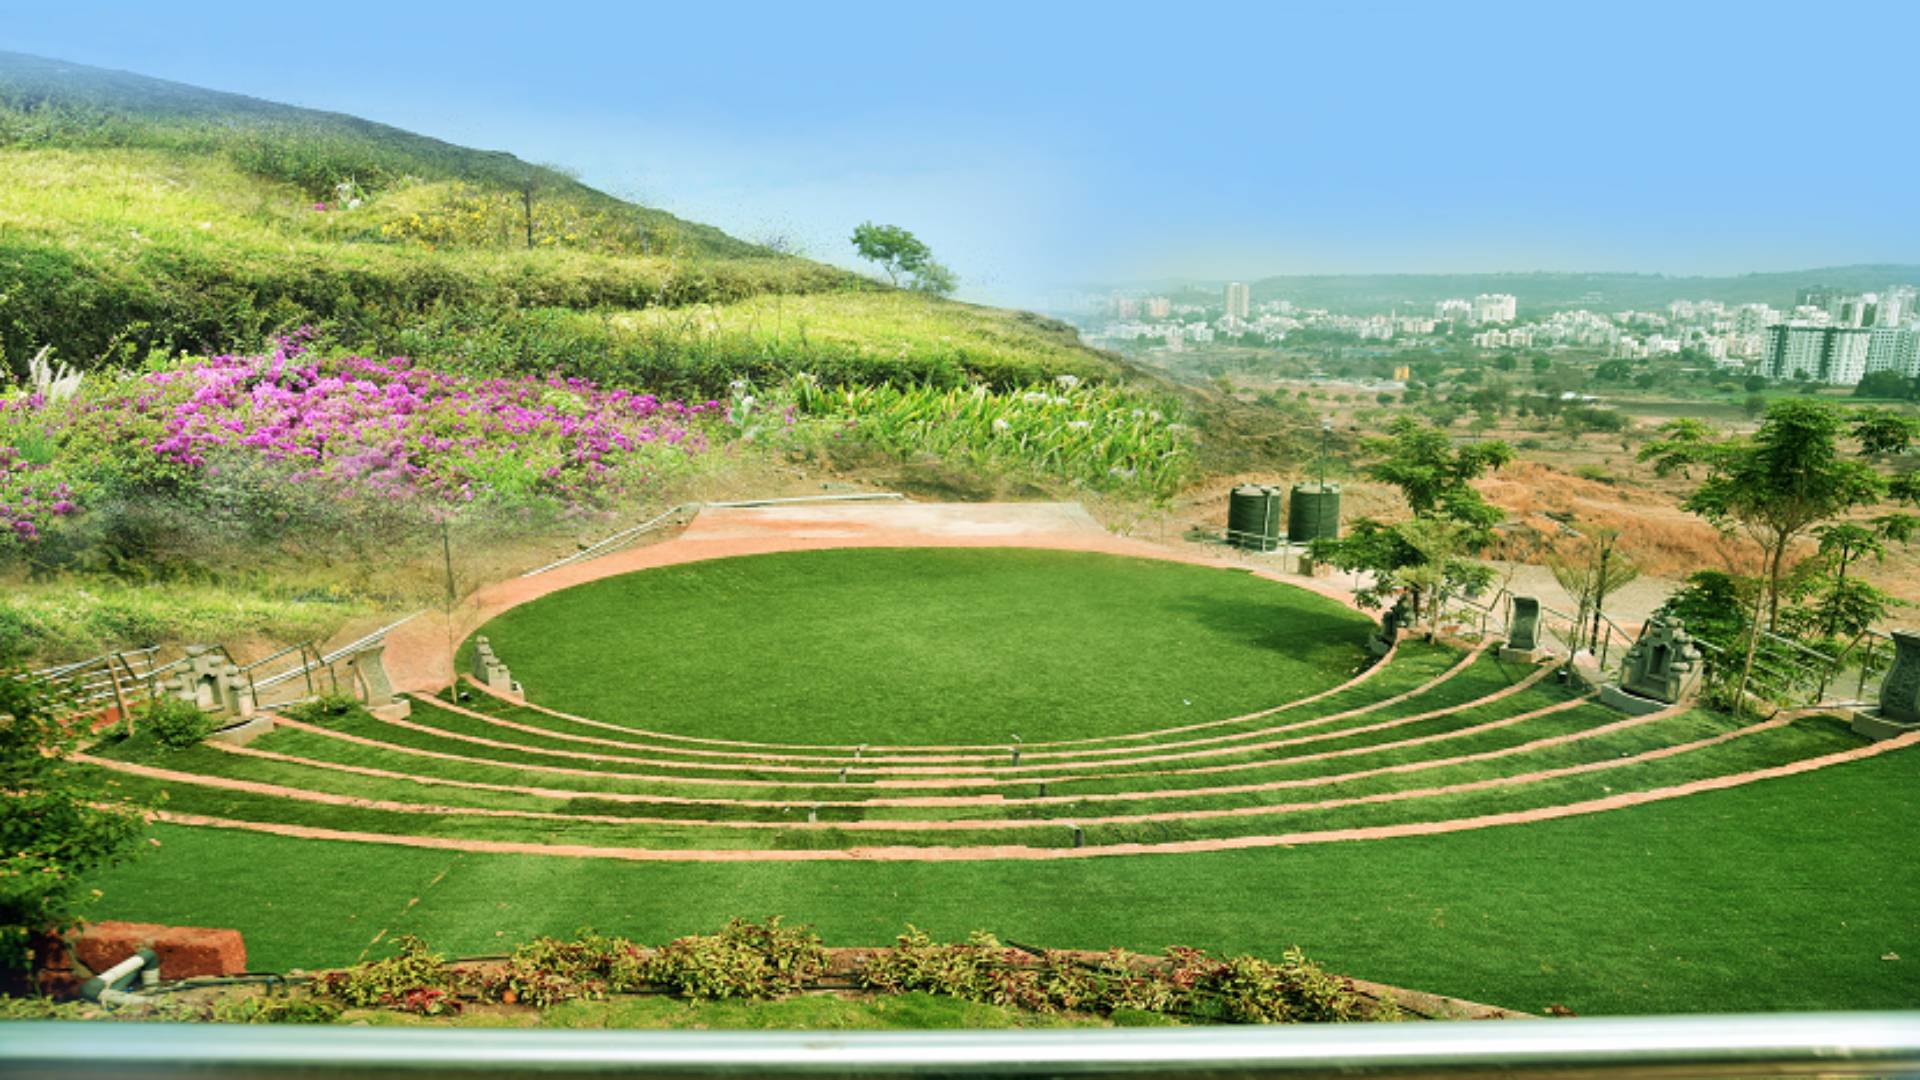 The Laterite - Hilltop Amphitheatre at Sunny's World Pune (1)